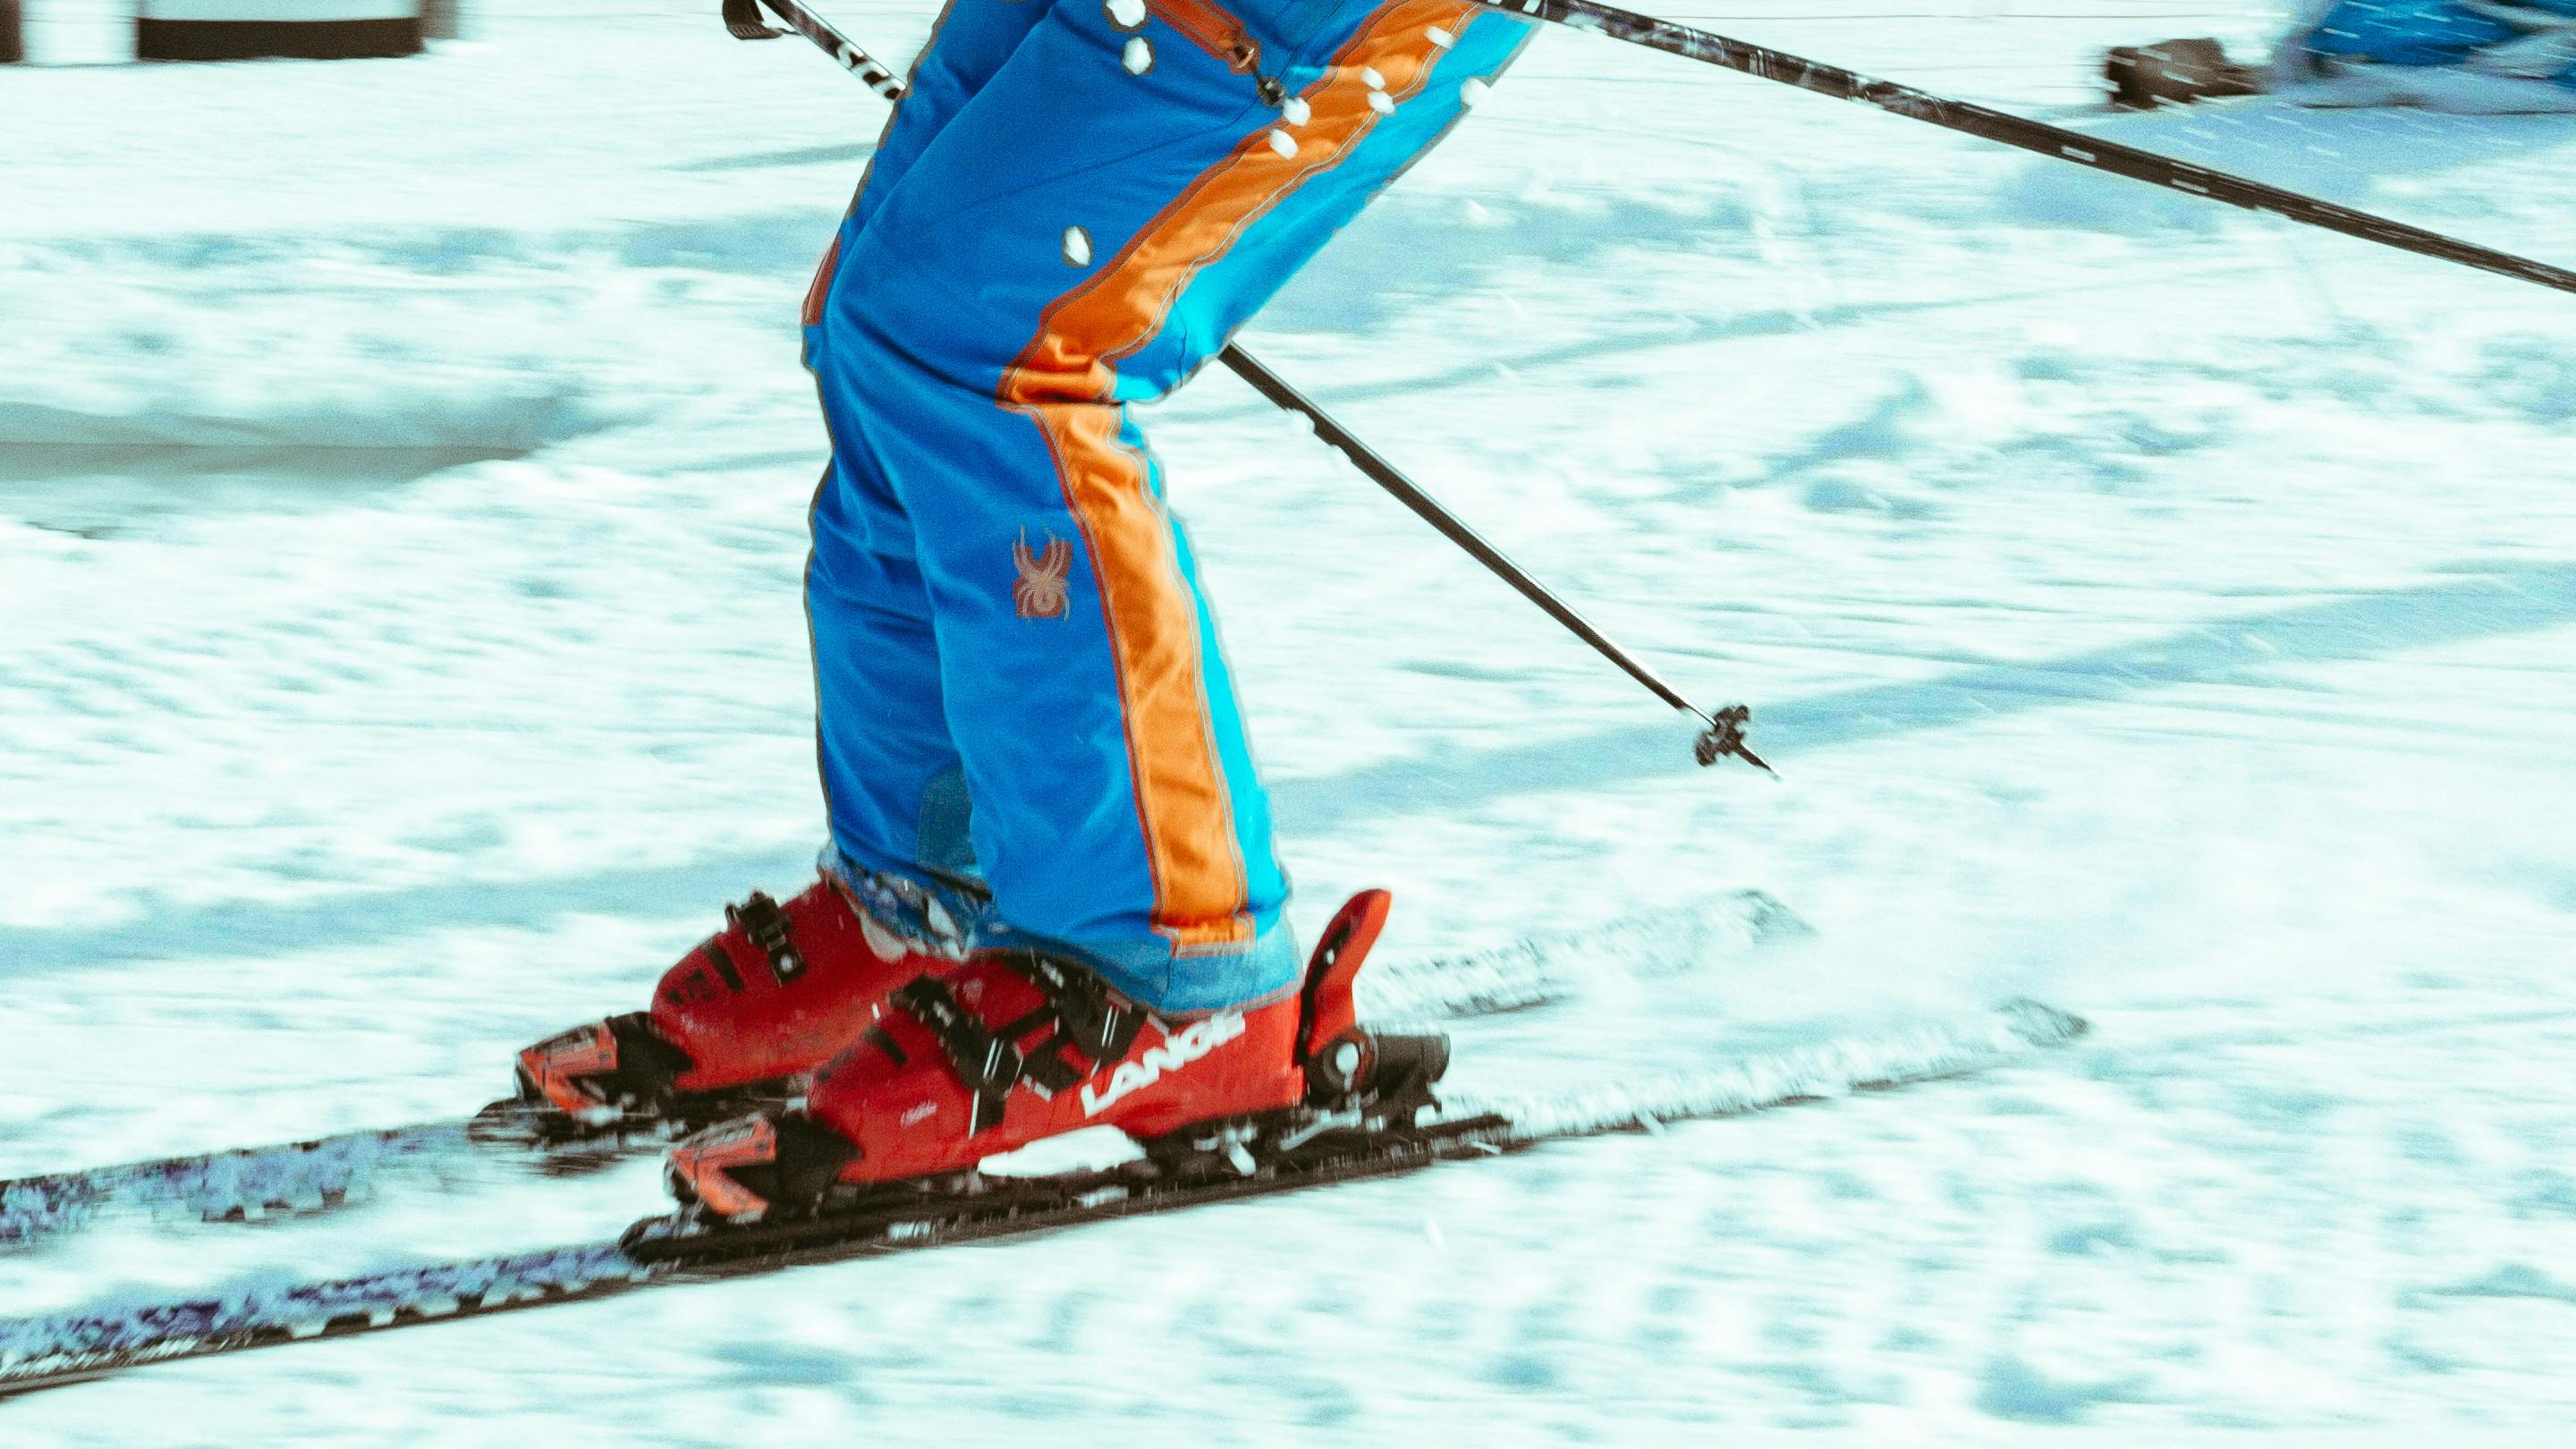 Close up of ski boots as a skier is turning down a snowy slope. 